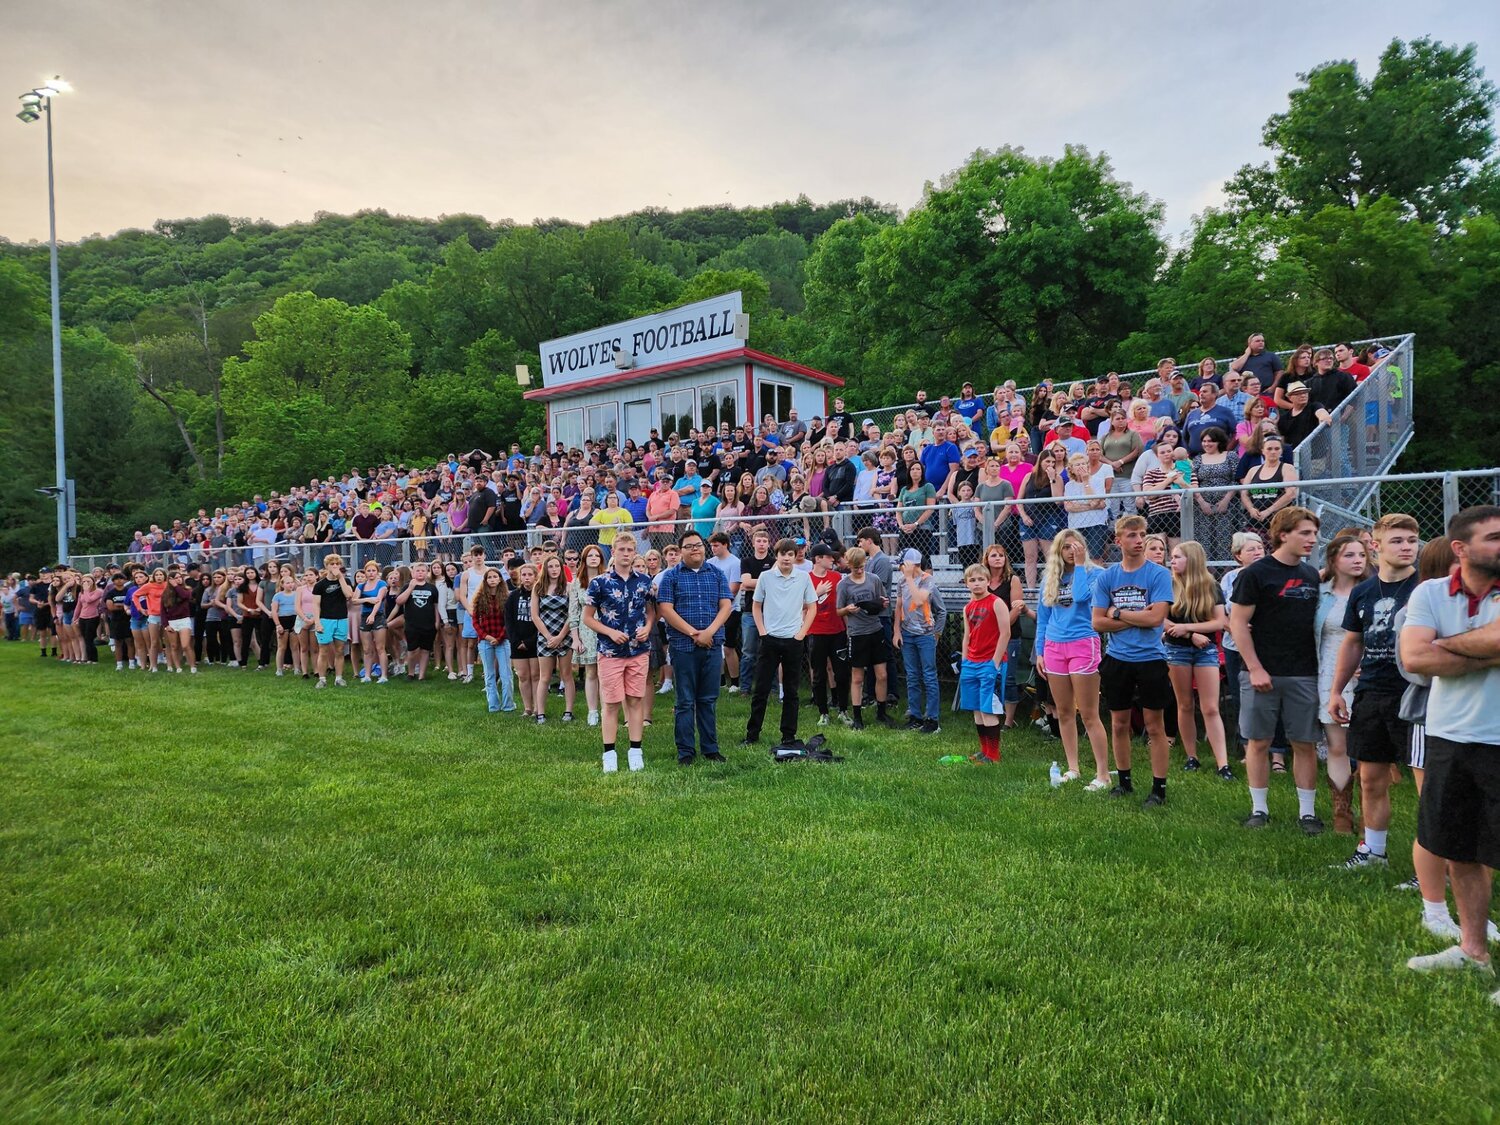 The Elmwood football field was filled with community members Wednesday, May 31 supporting the Bleskacek and Loga families at a prayer vigil.